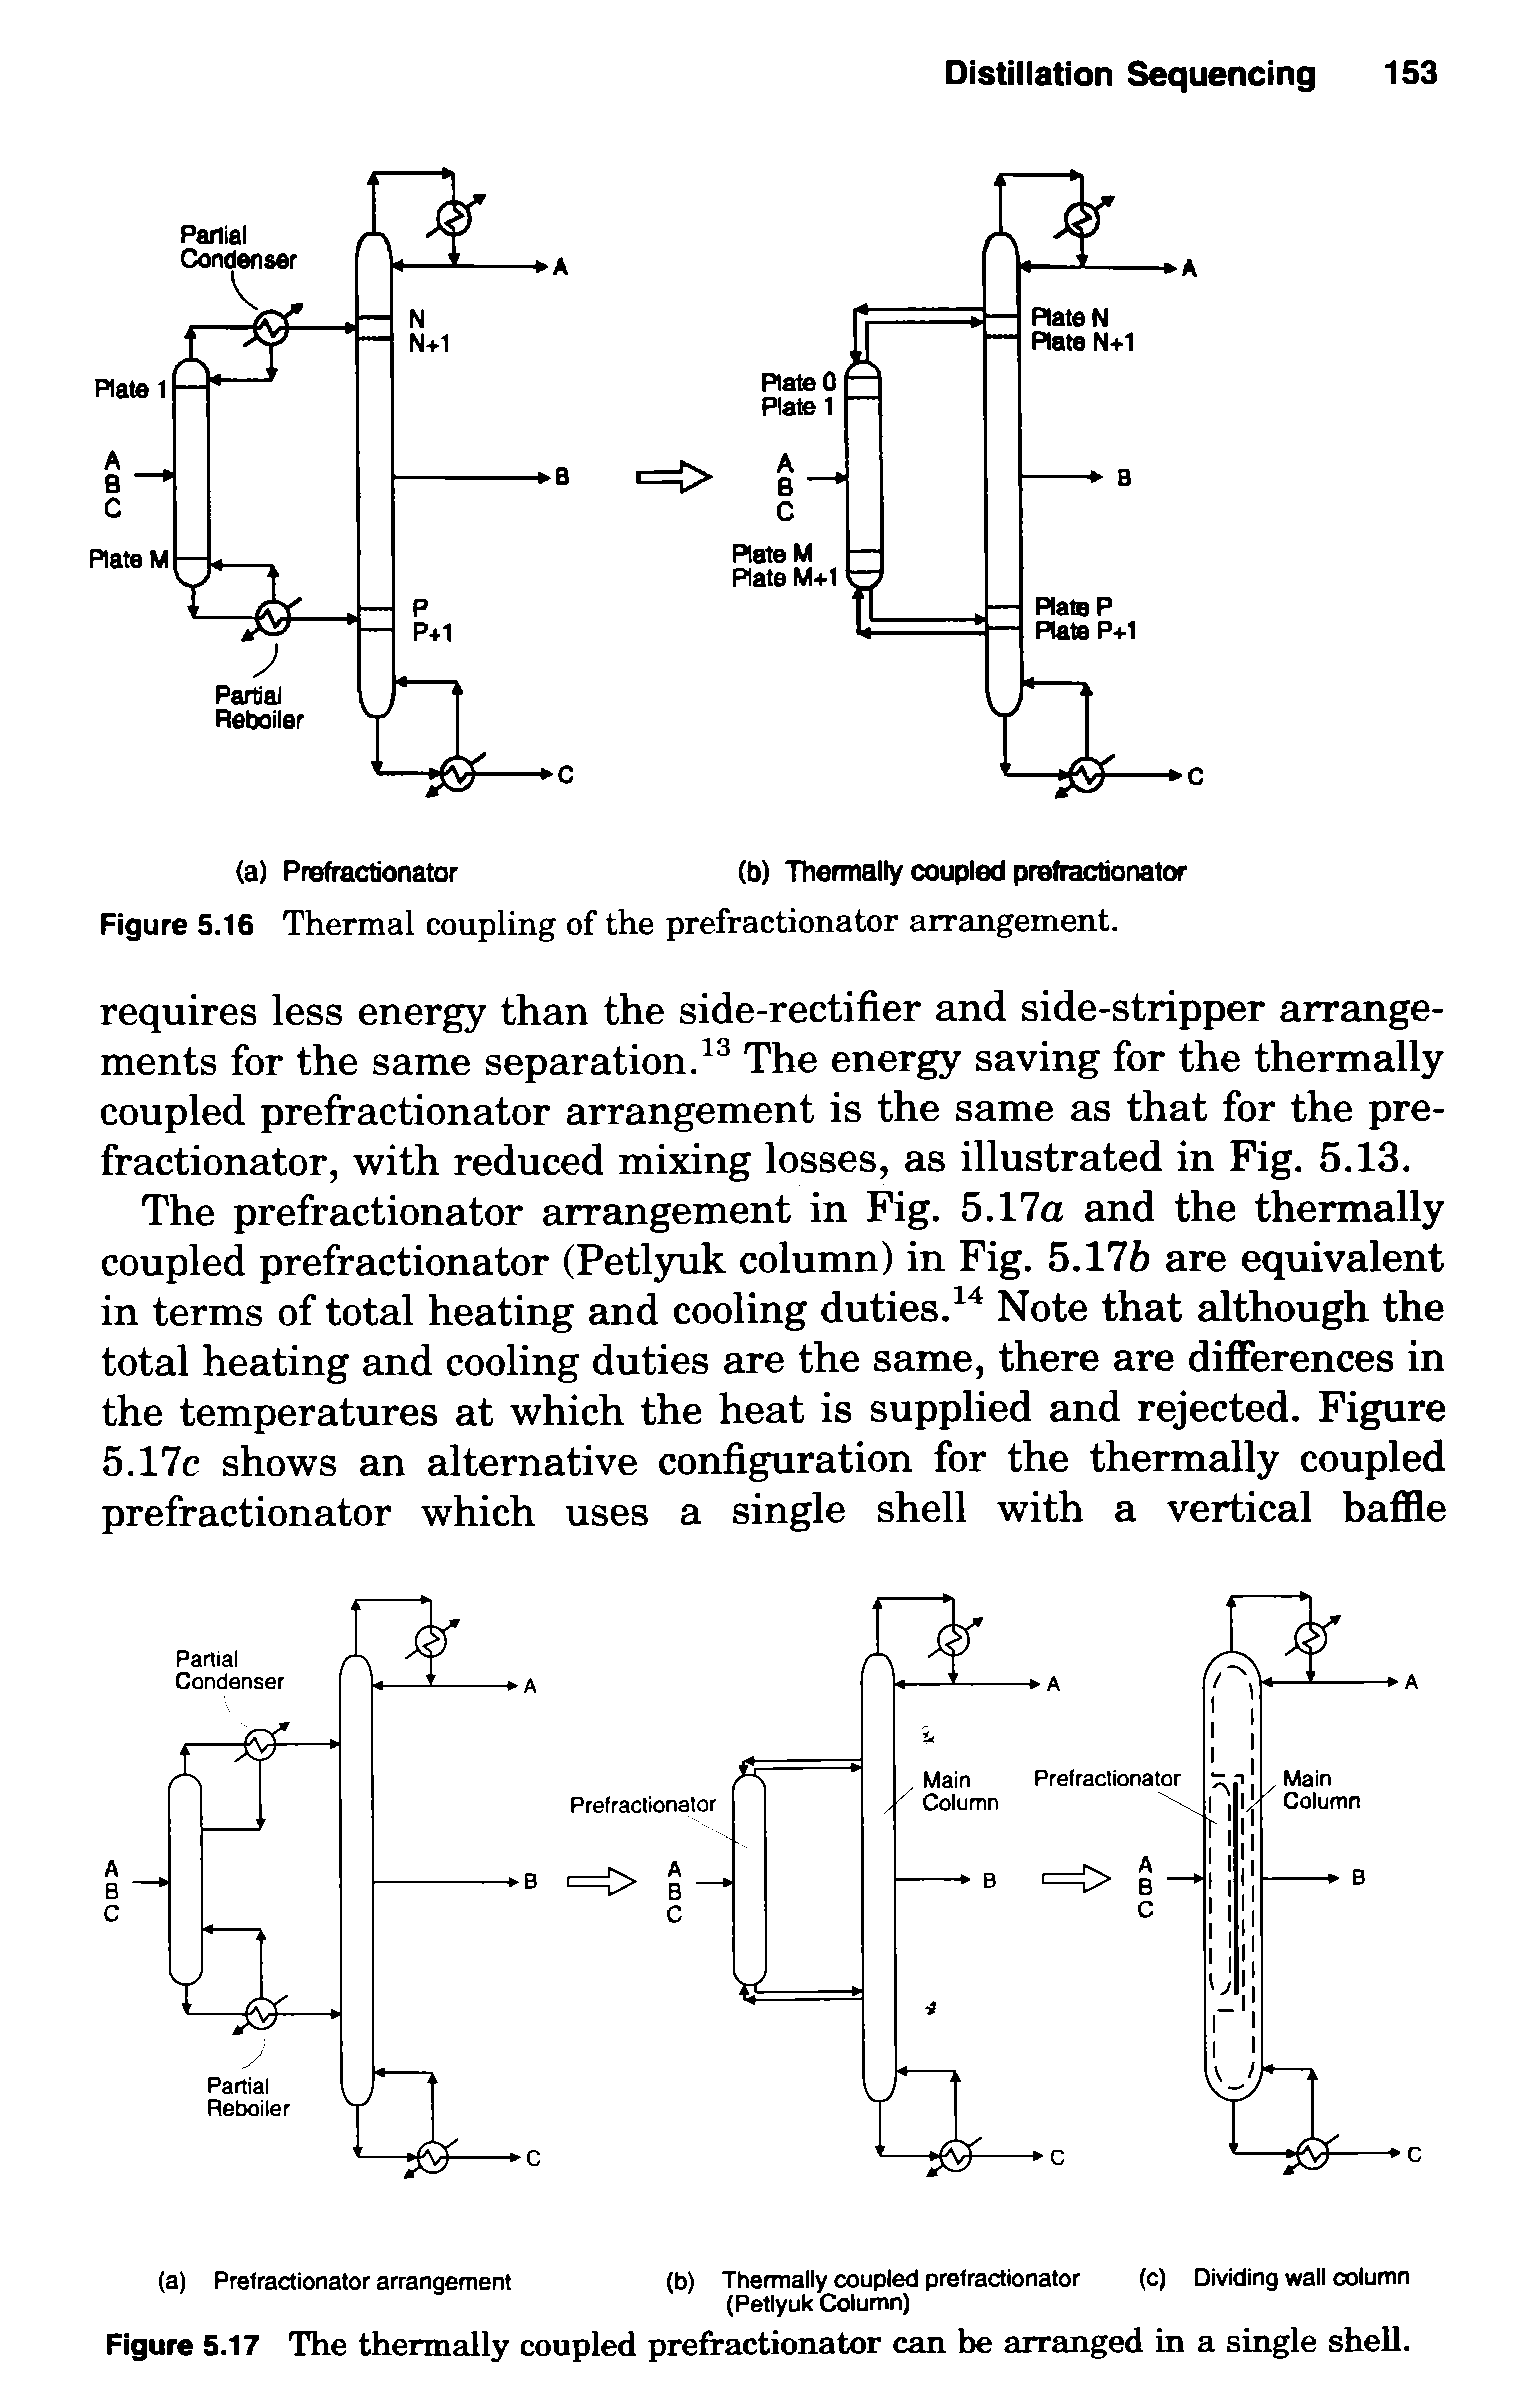 Figure 5.17 The thermally coupled prefractionator can he arranged in a single shell.